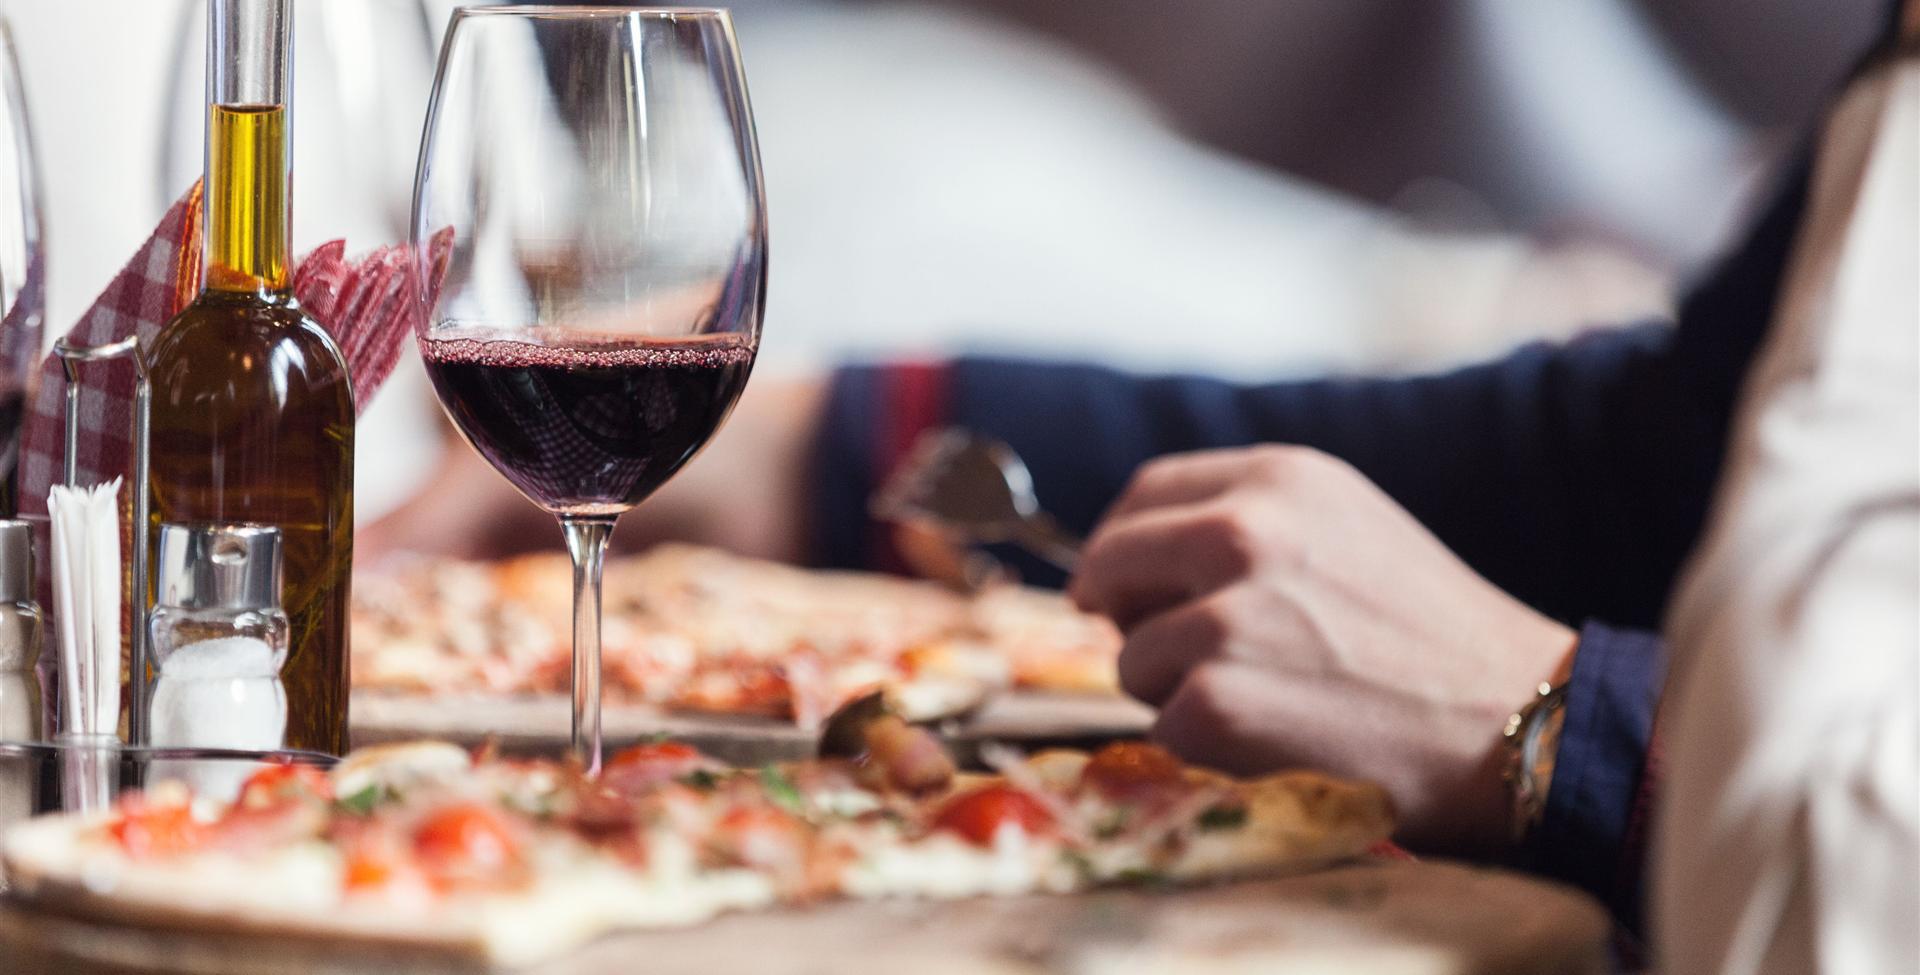 A glass of wine and pizza